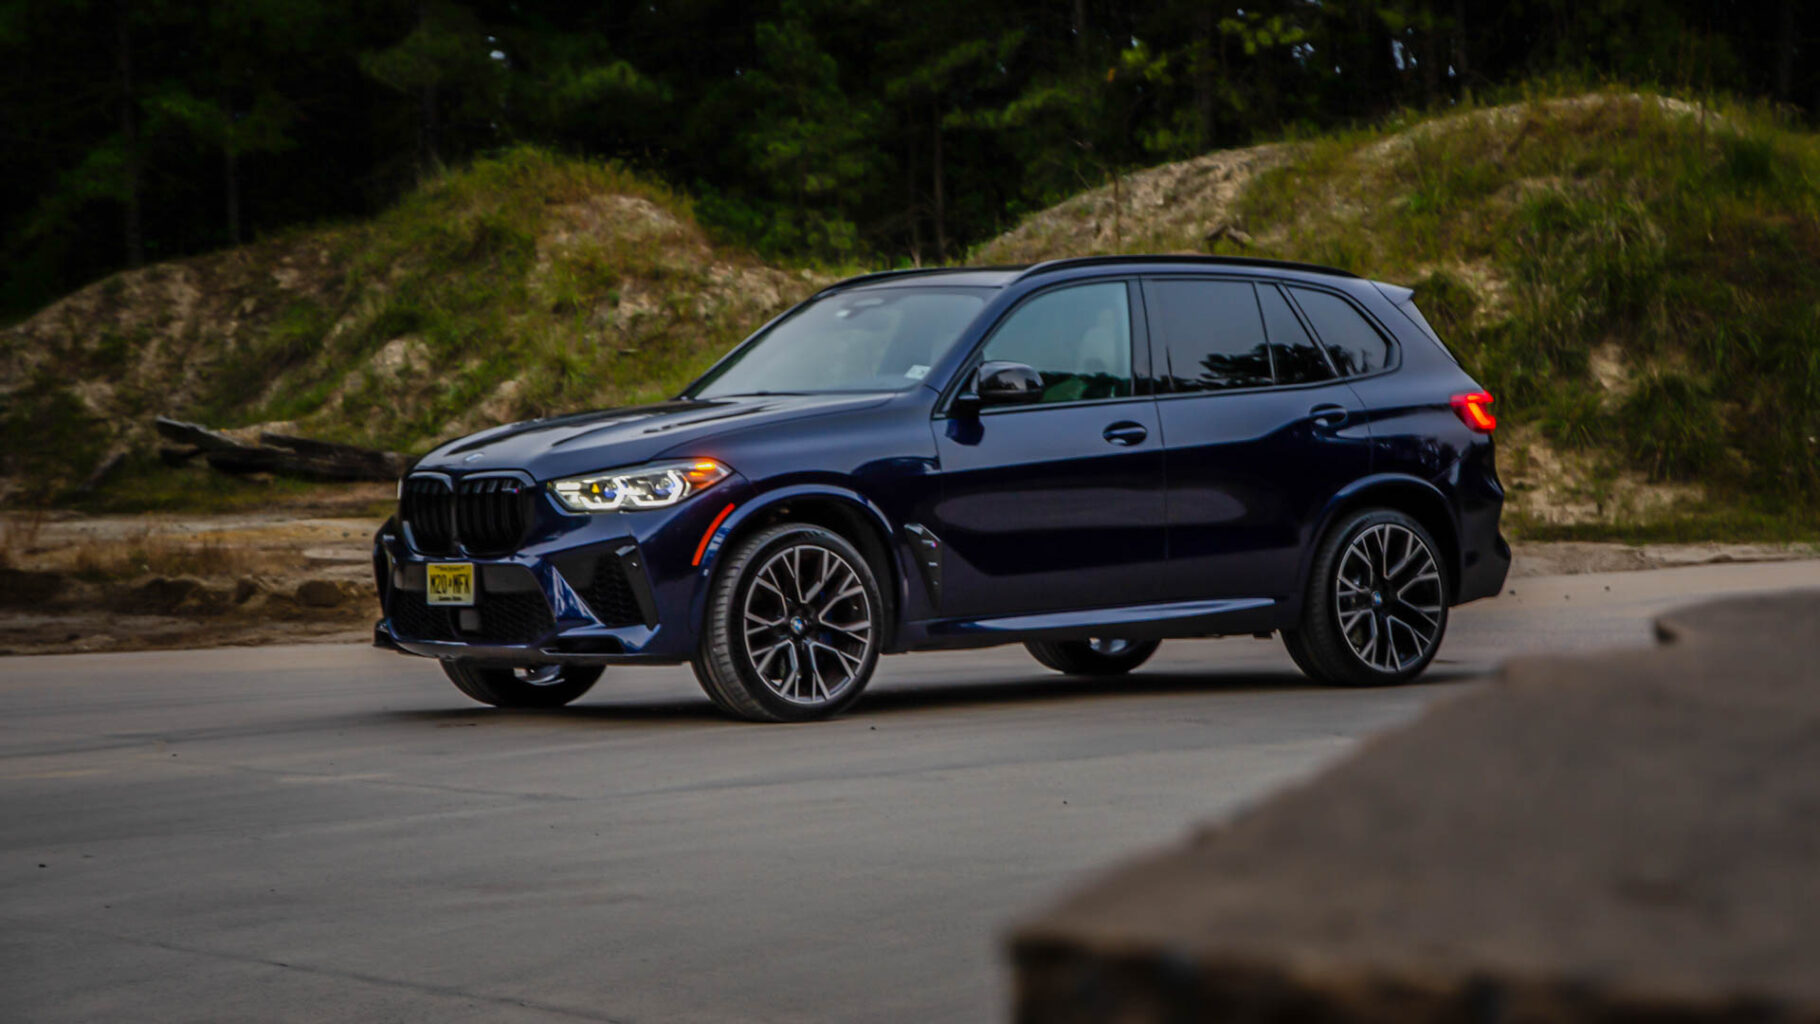 TEST DRIVE: BMW X5 M Competition -- Worth Buying Over the M50i?